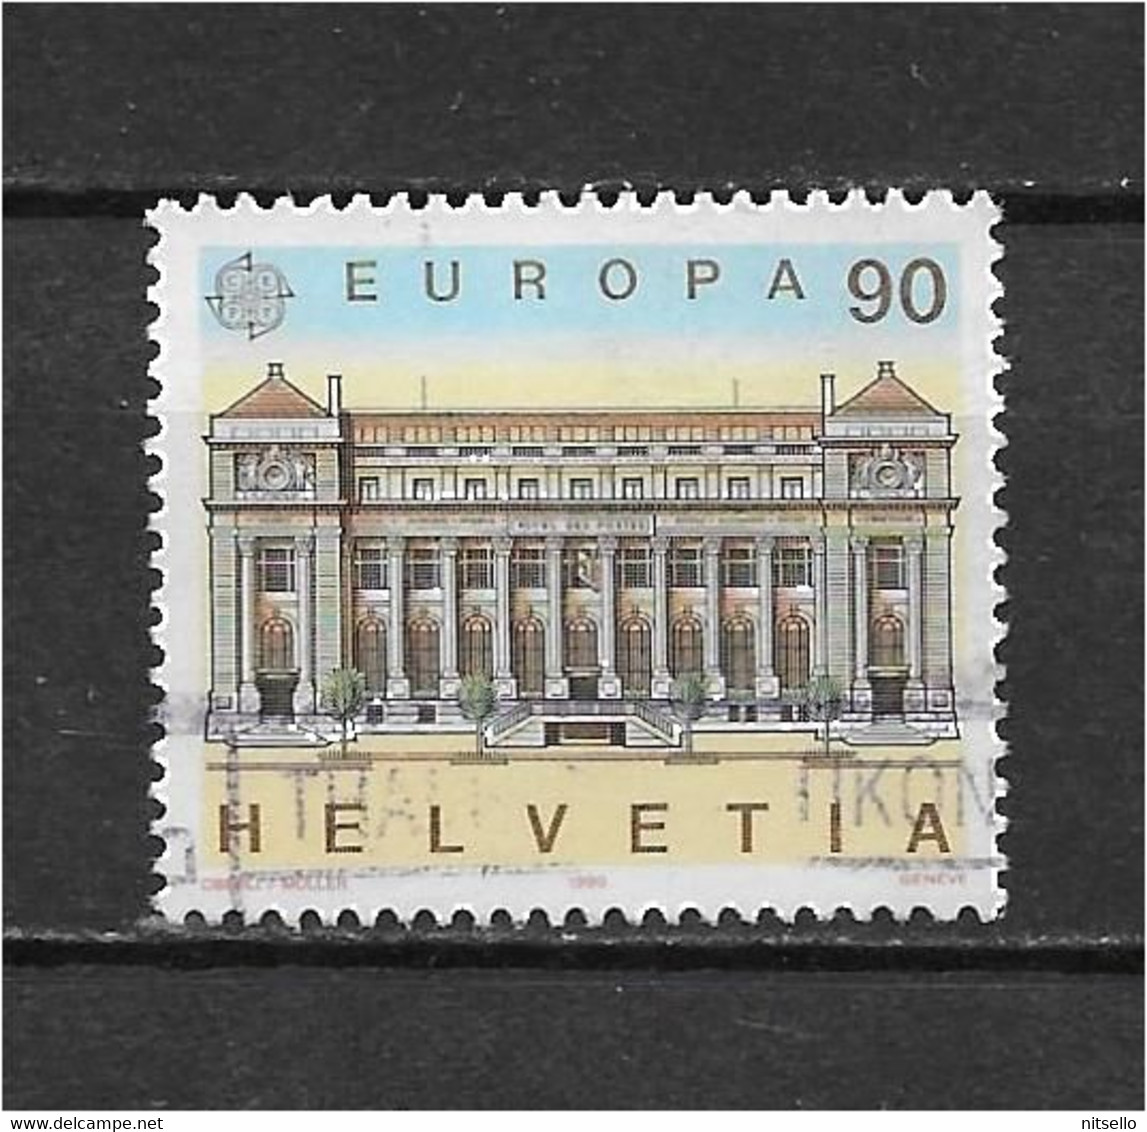 LOTE 1530A /// SUIZA YVERT Nº: 1348  ¡¡¡ OFERTA - LIQUIDATION - JE LIQUIDE !!! - Used Stamps